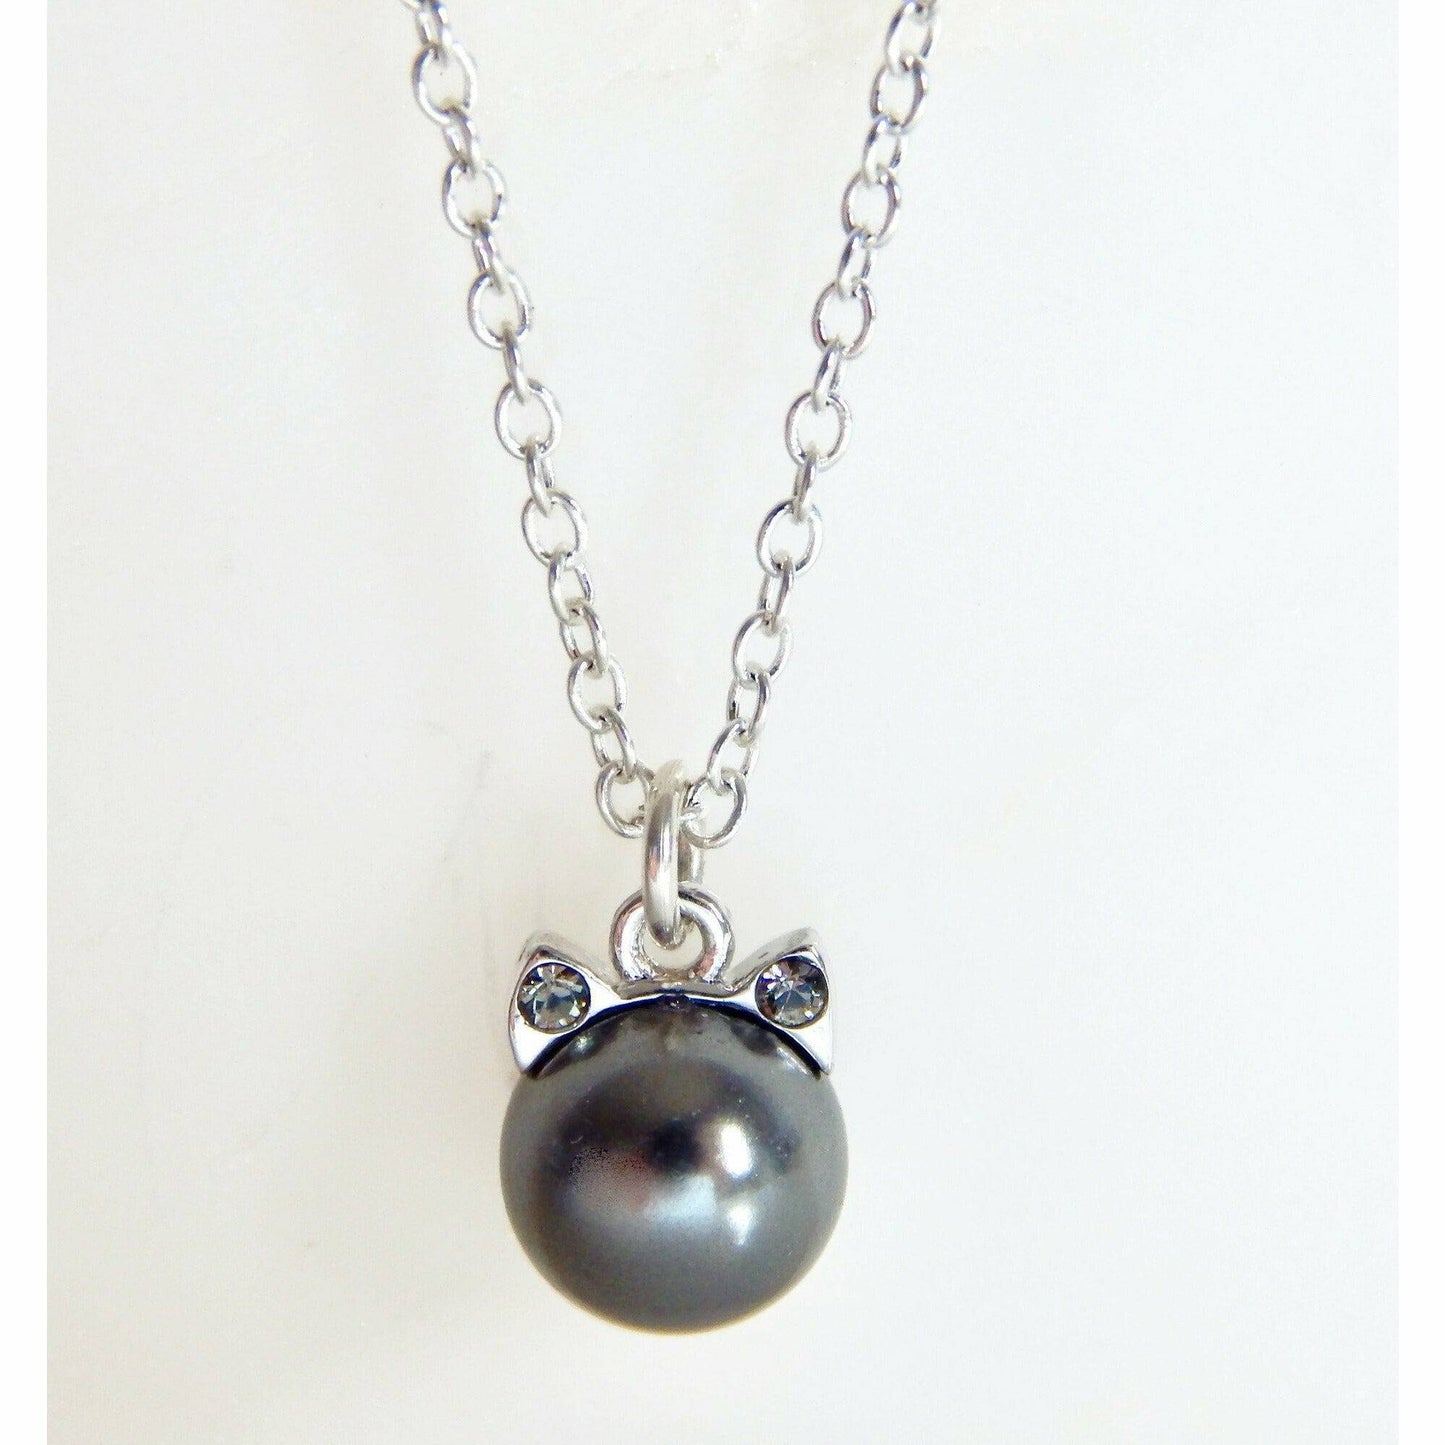 Black pearl cat necklace